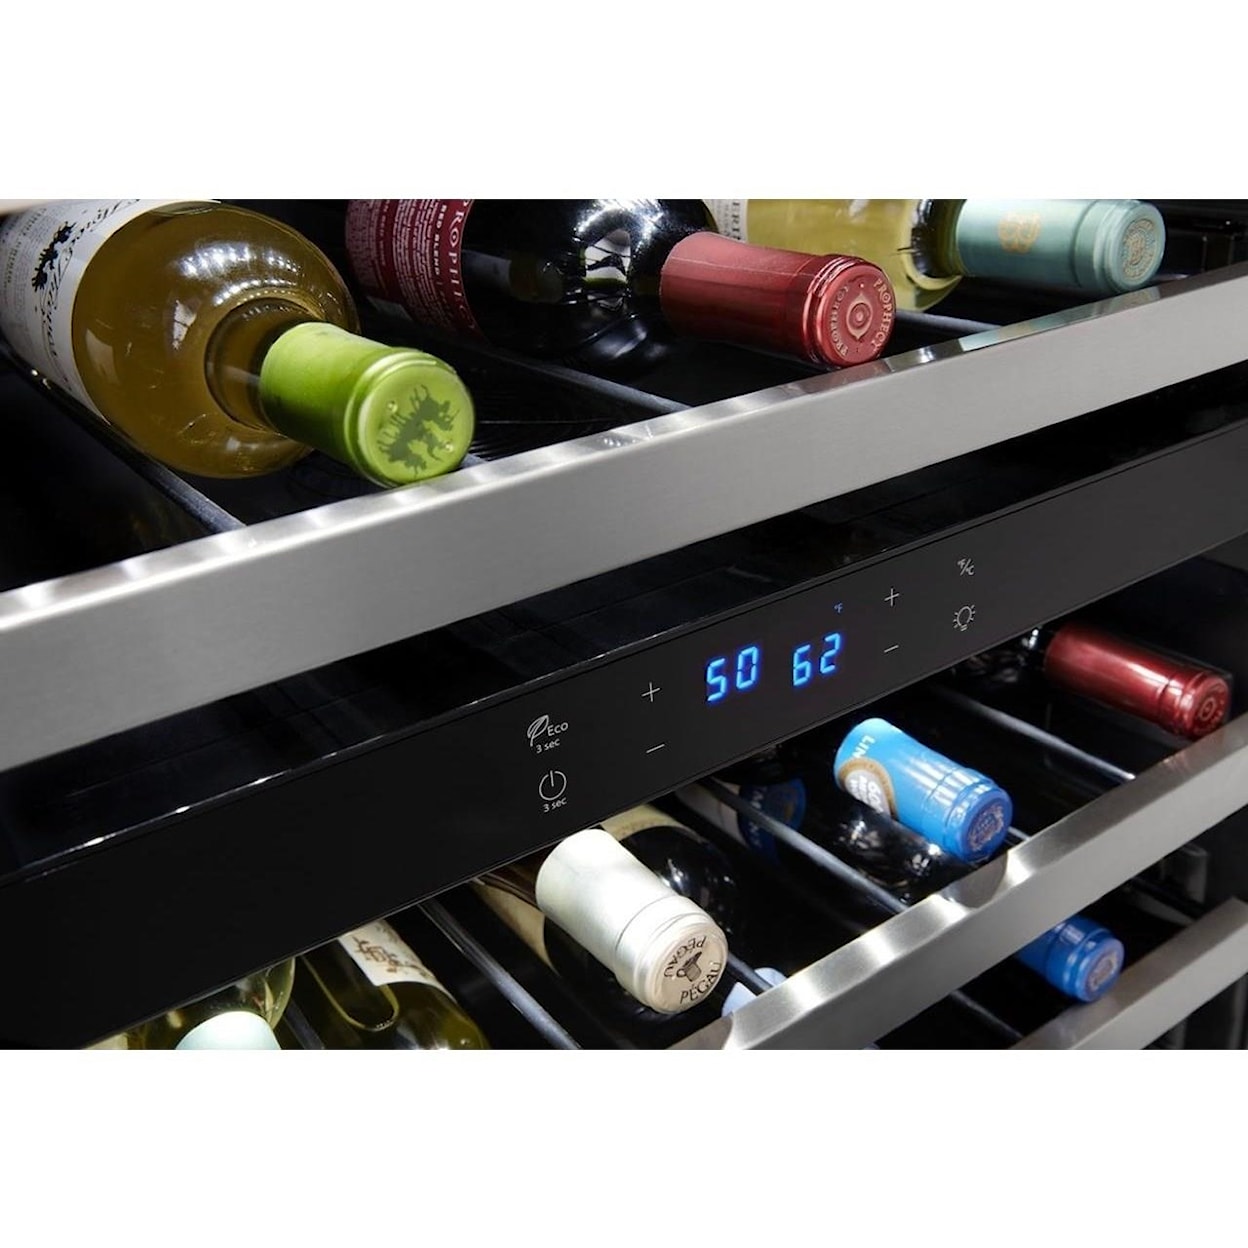 Whirlpool Wine Cellars 24-inch Wide Undercounter Wine Center with 4